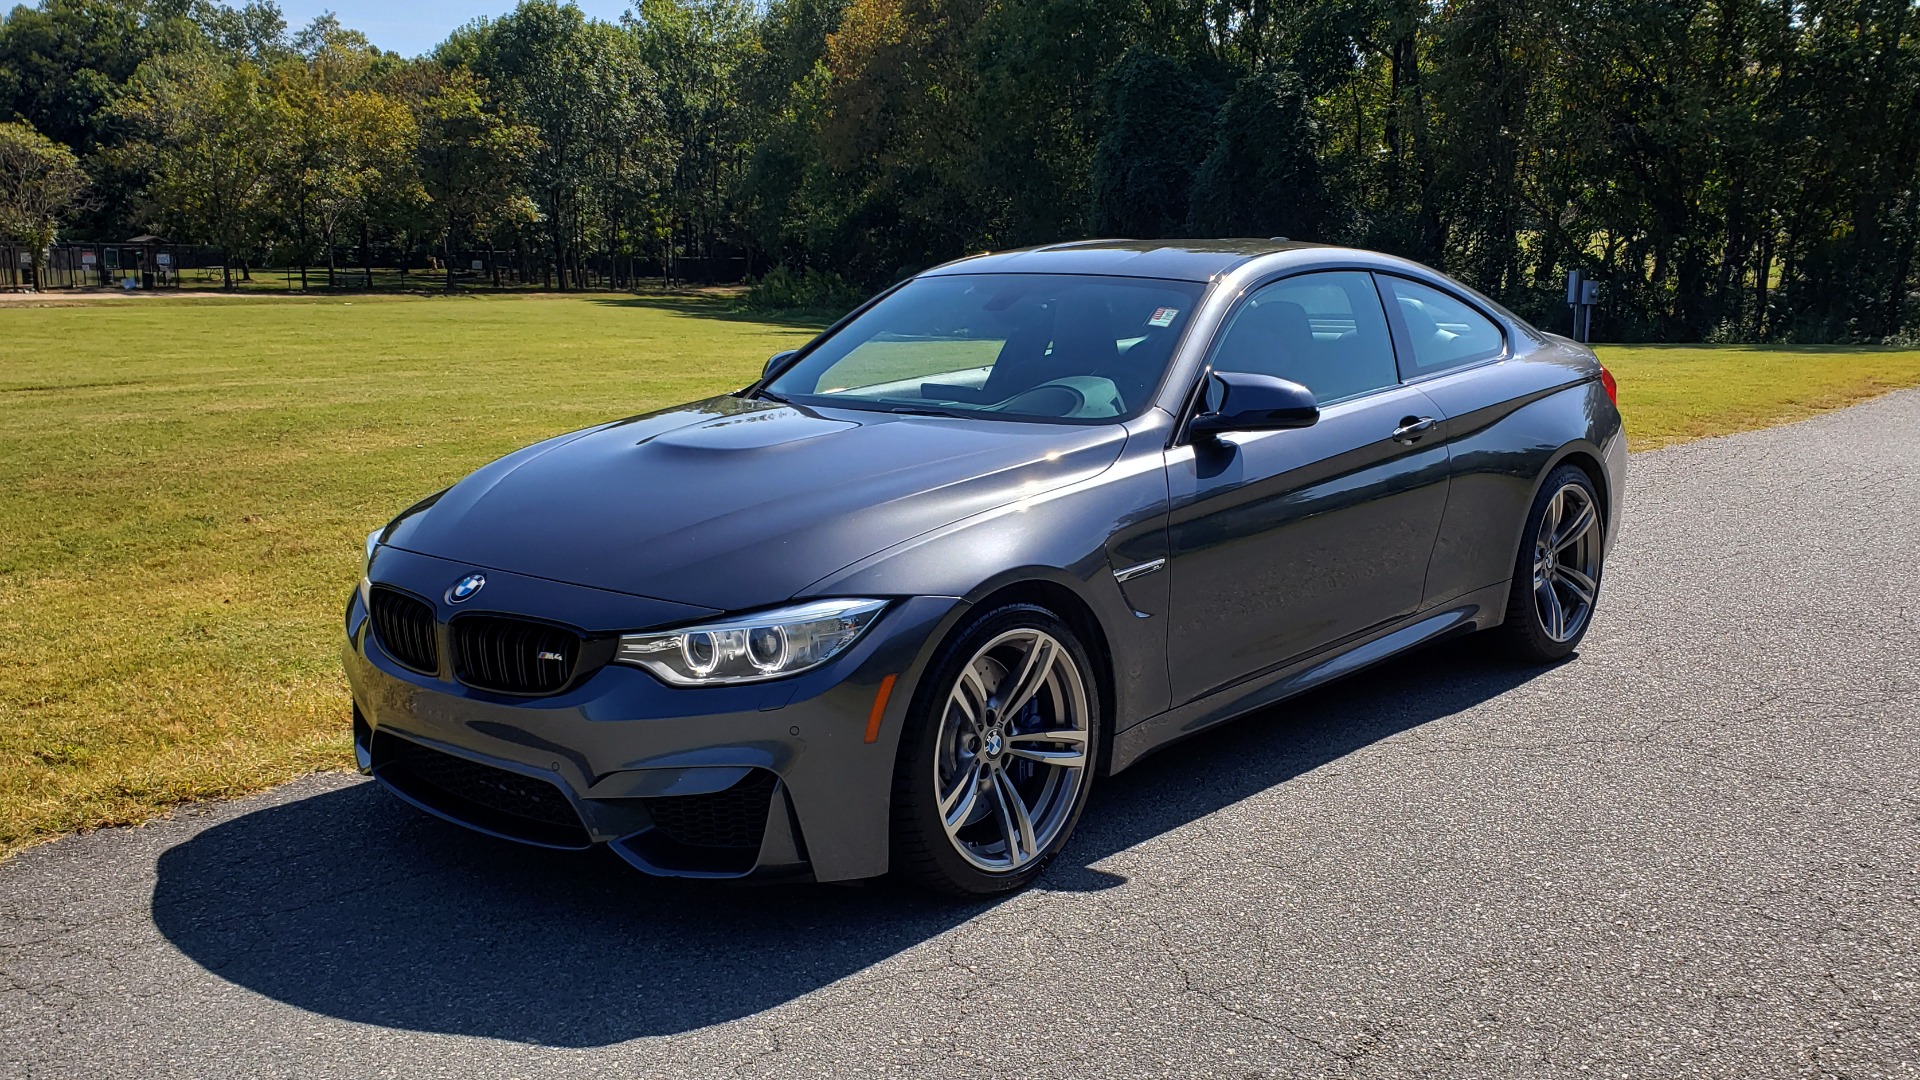 Used 2015 BMW M4 COUPE / EXEC PKG / ADAPT M SUSP / CF ROOF / NAV / REARVIEW for sale Sold at Formula Imports in Charlotte NC 28227 3